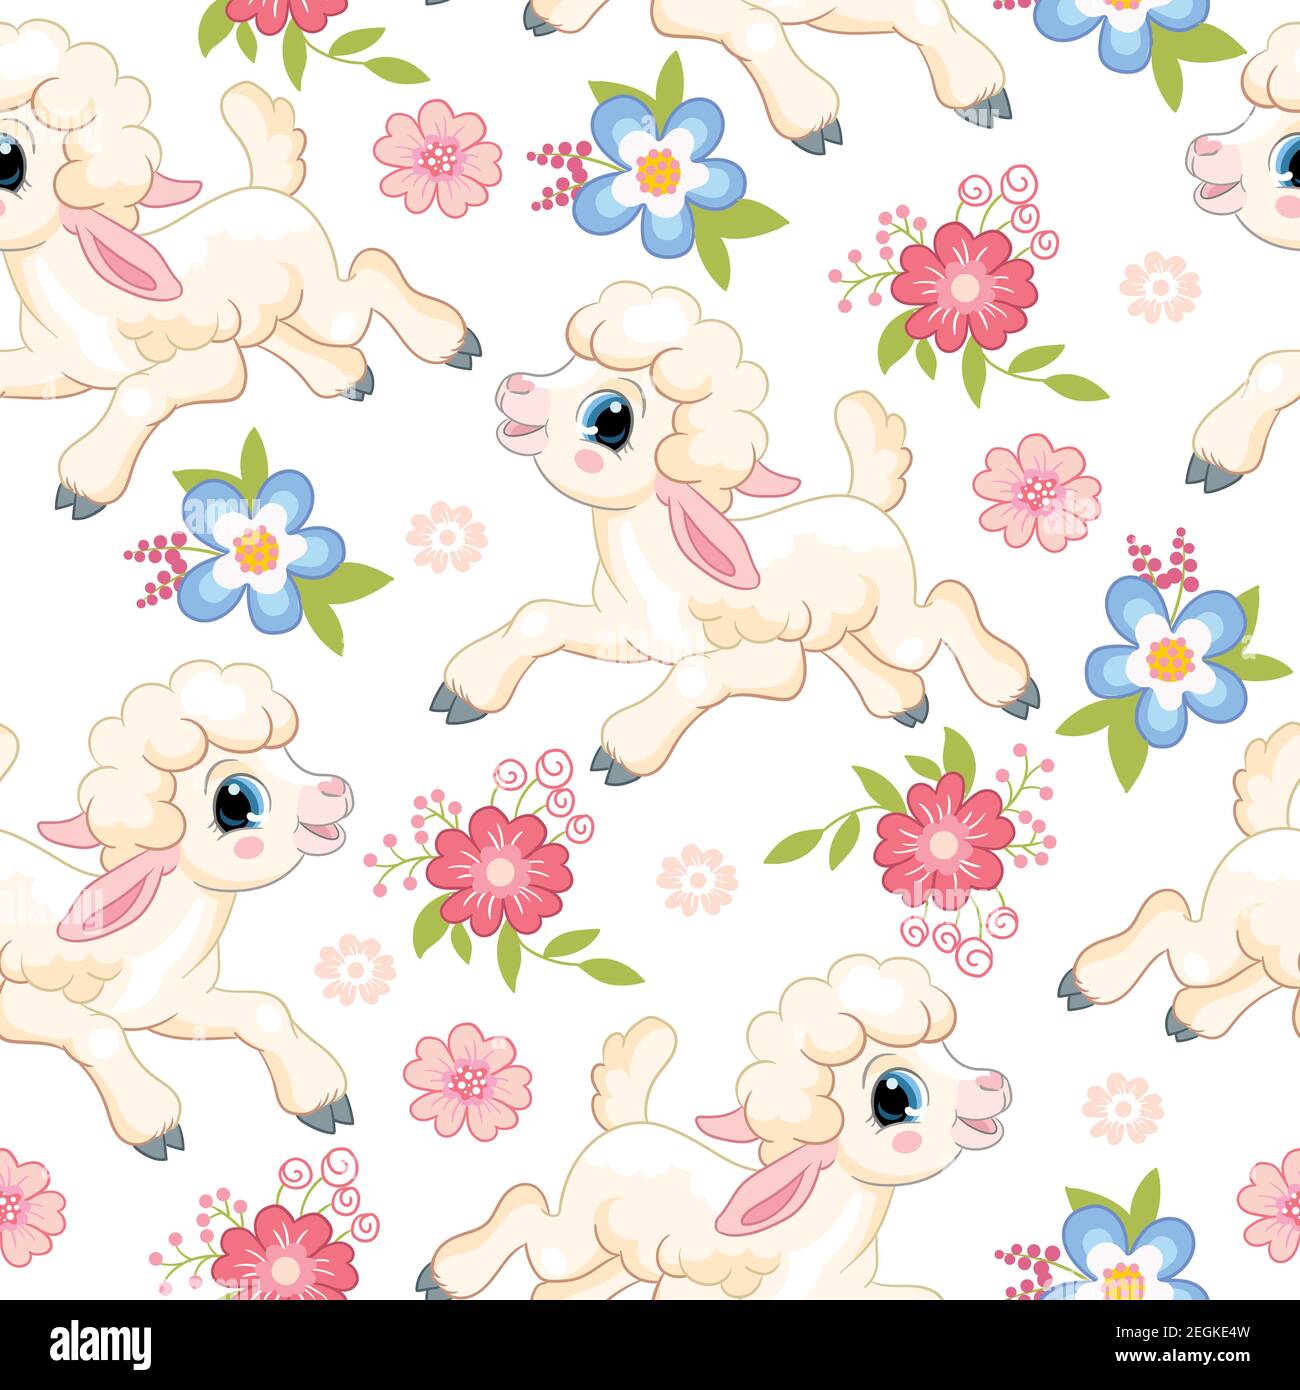 Seamless vector pattern with spring concept. Cute cartoon character lambs and flowers. Colorful illustration isolated on white background. For print, Stock Vector